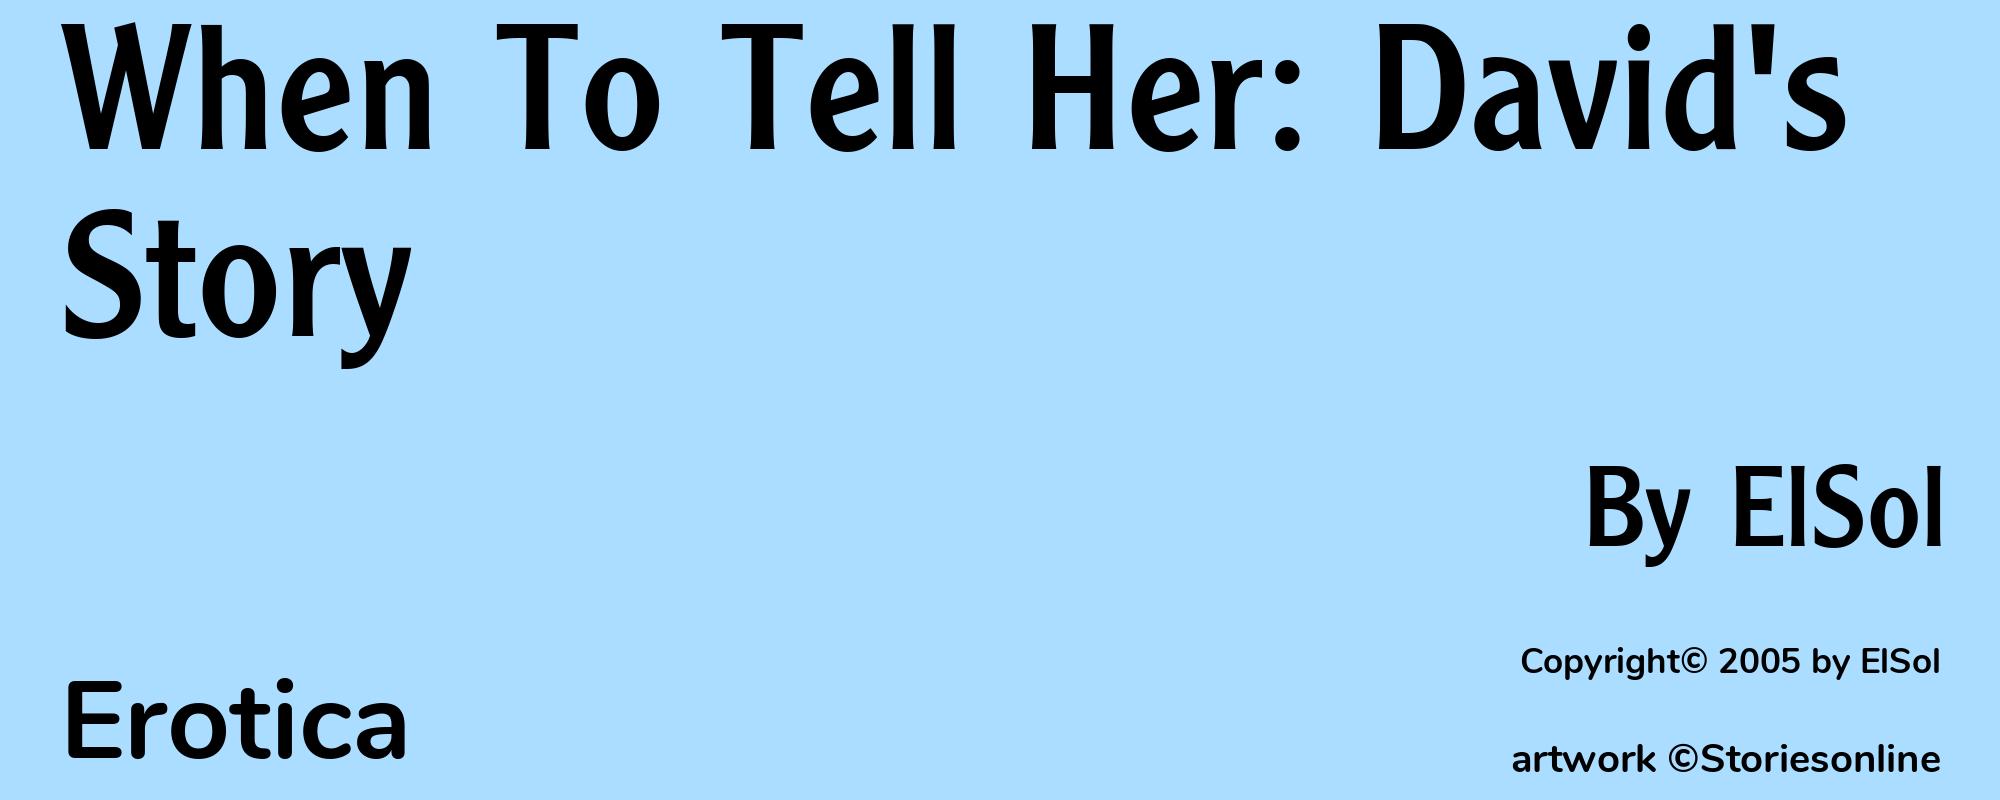 When To Tell Her: David's Story - Cover